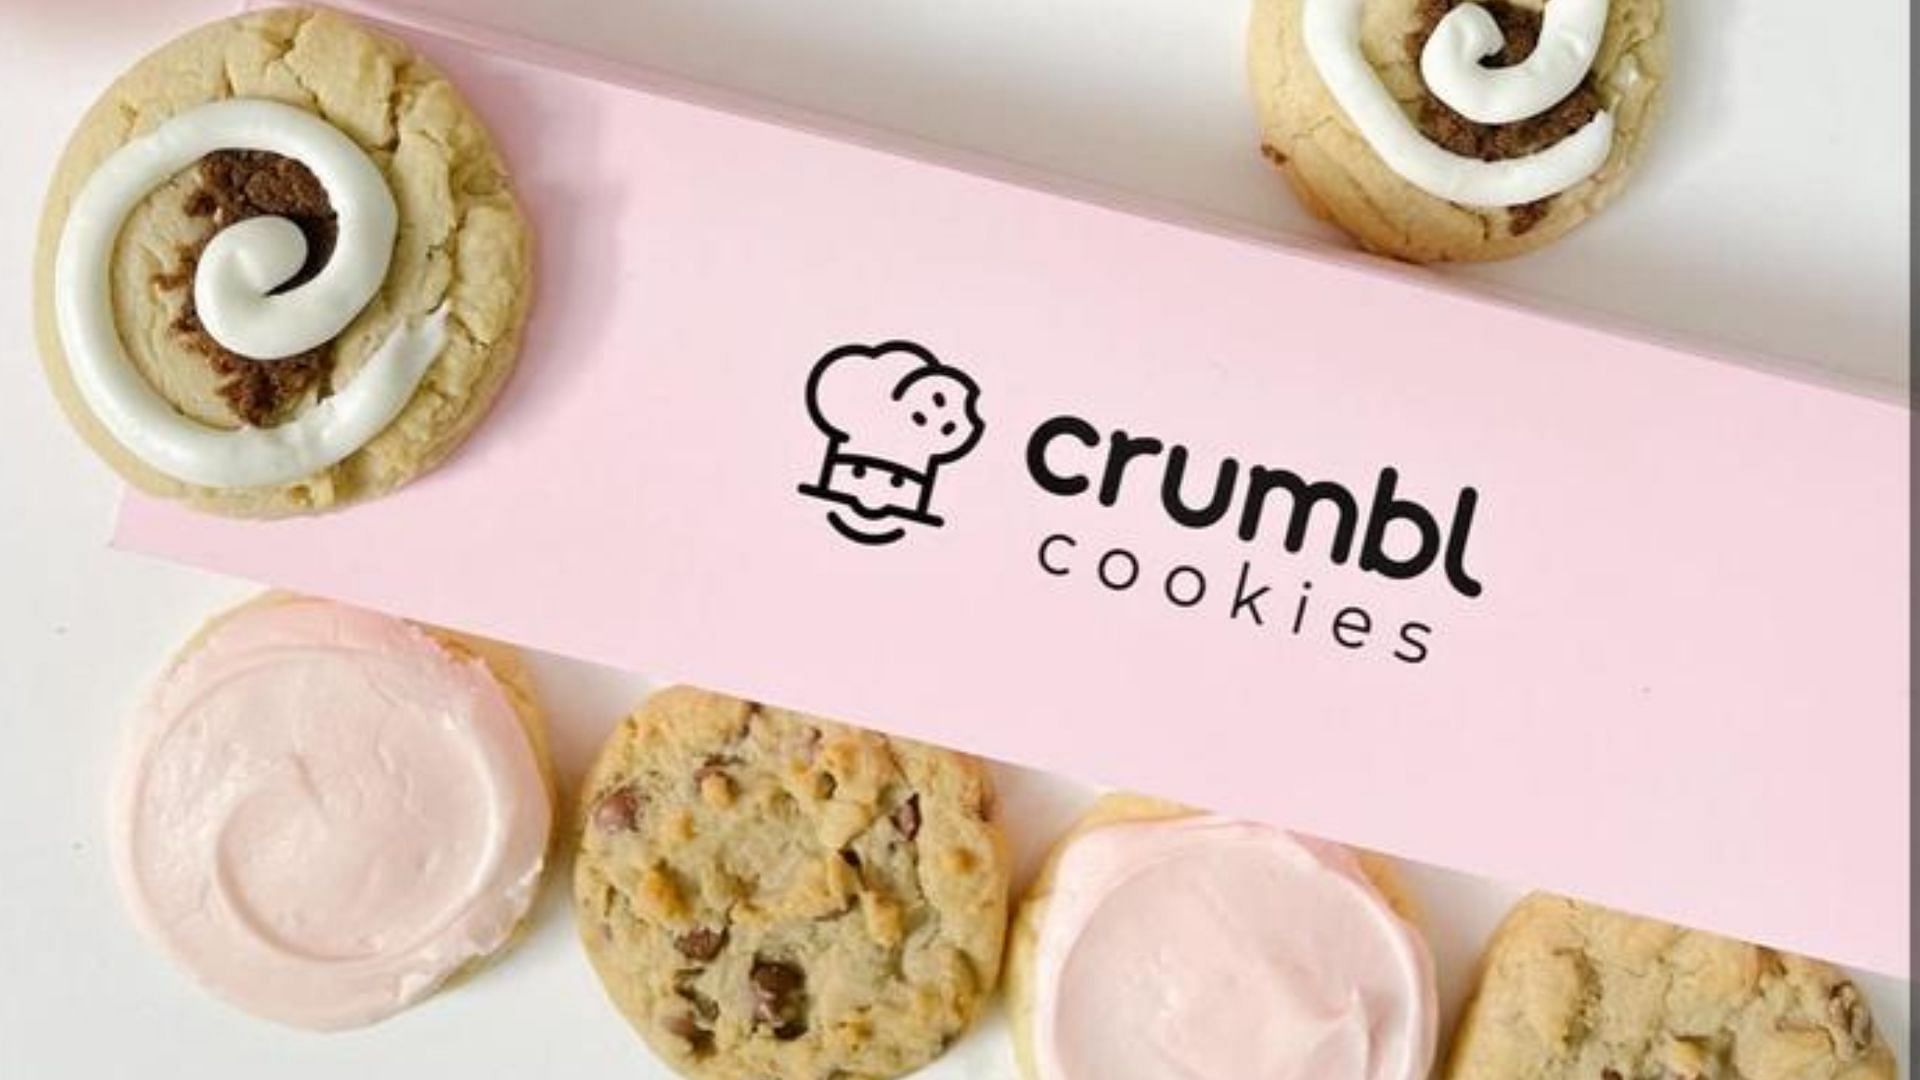 The Utah-based Crumbl Cookies violated Child Labor laws at several locations (Image via Crumbl Cookies)